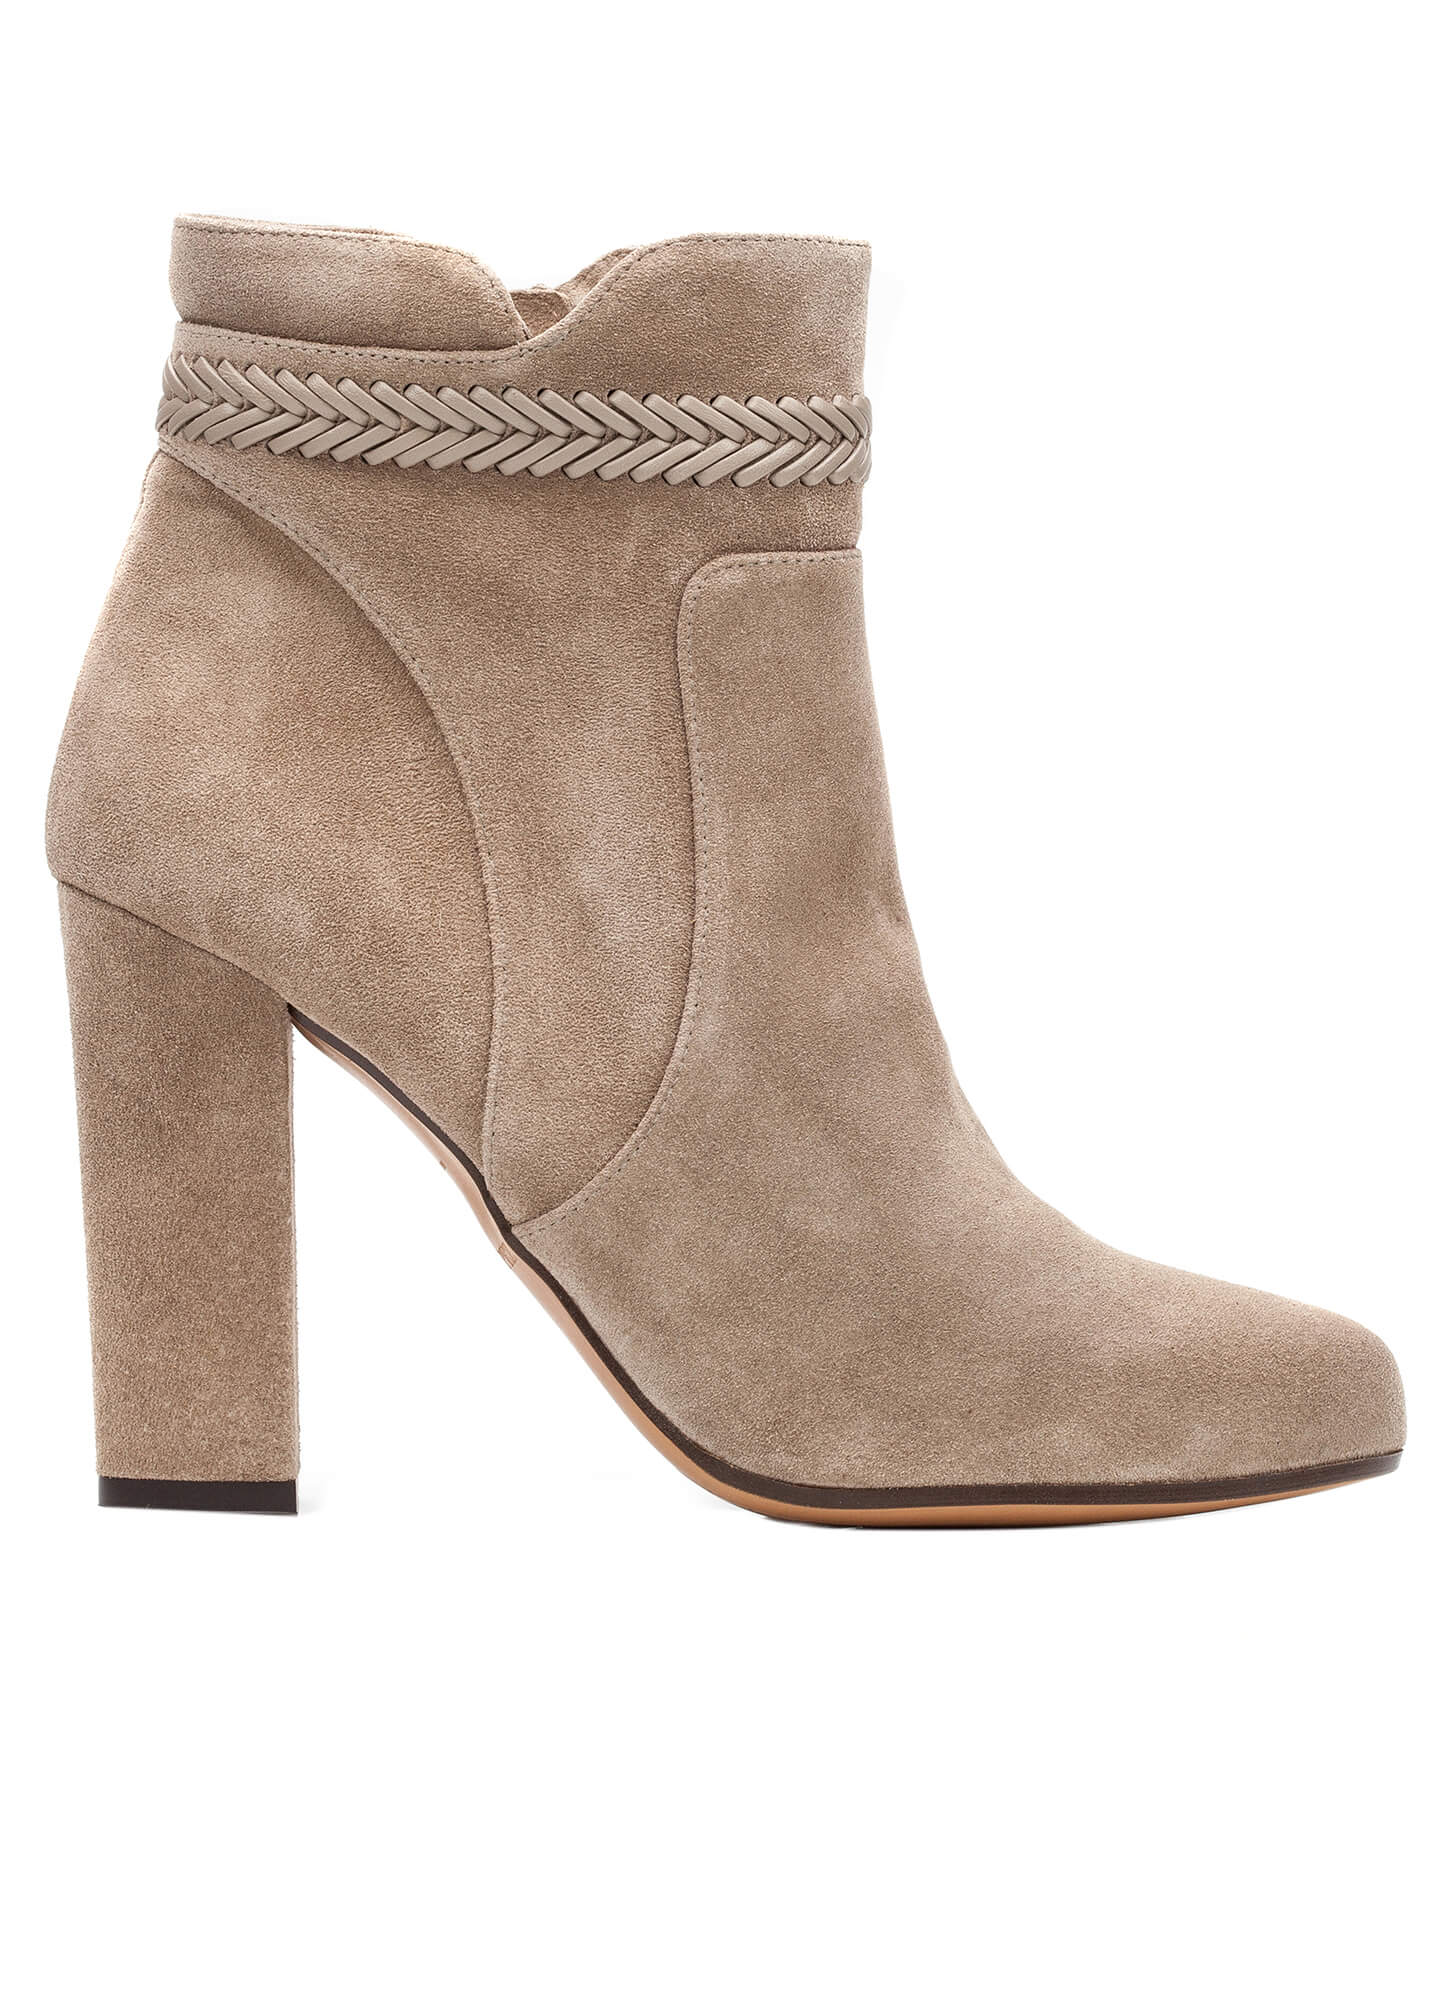 High heel ankle boots in taupe suede - online shoe store Pura Lopez ...